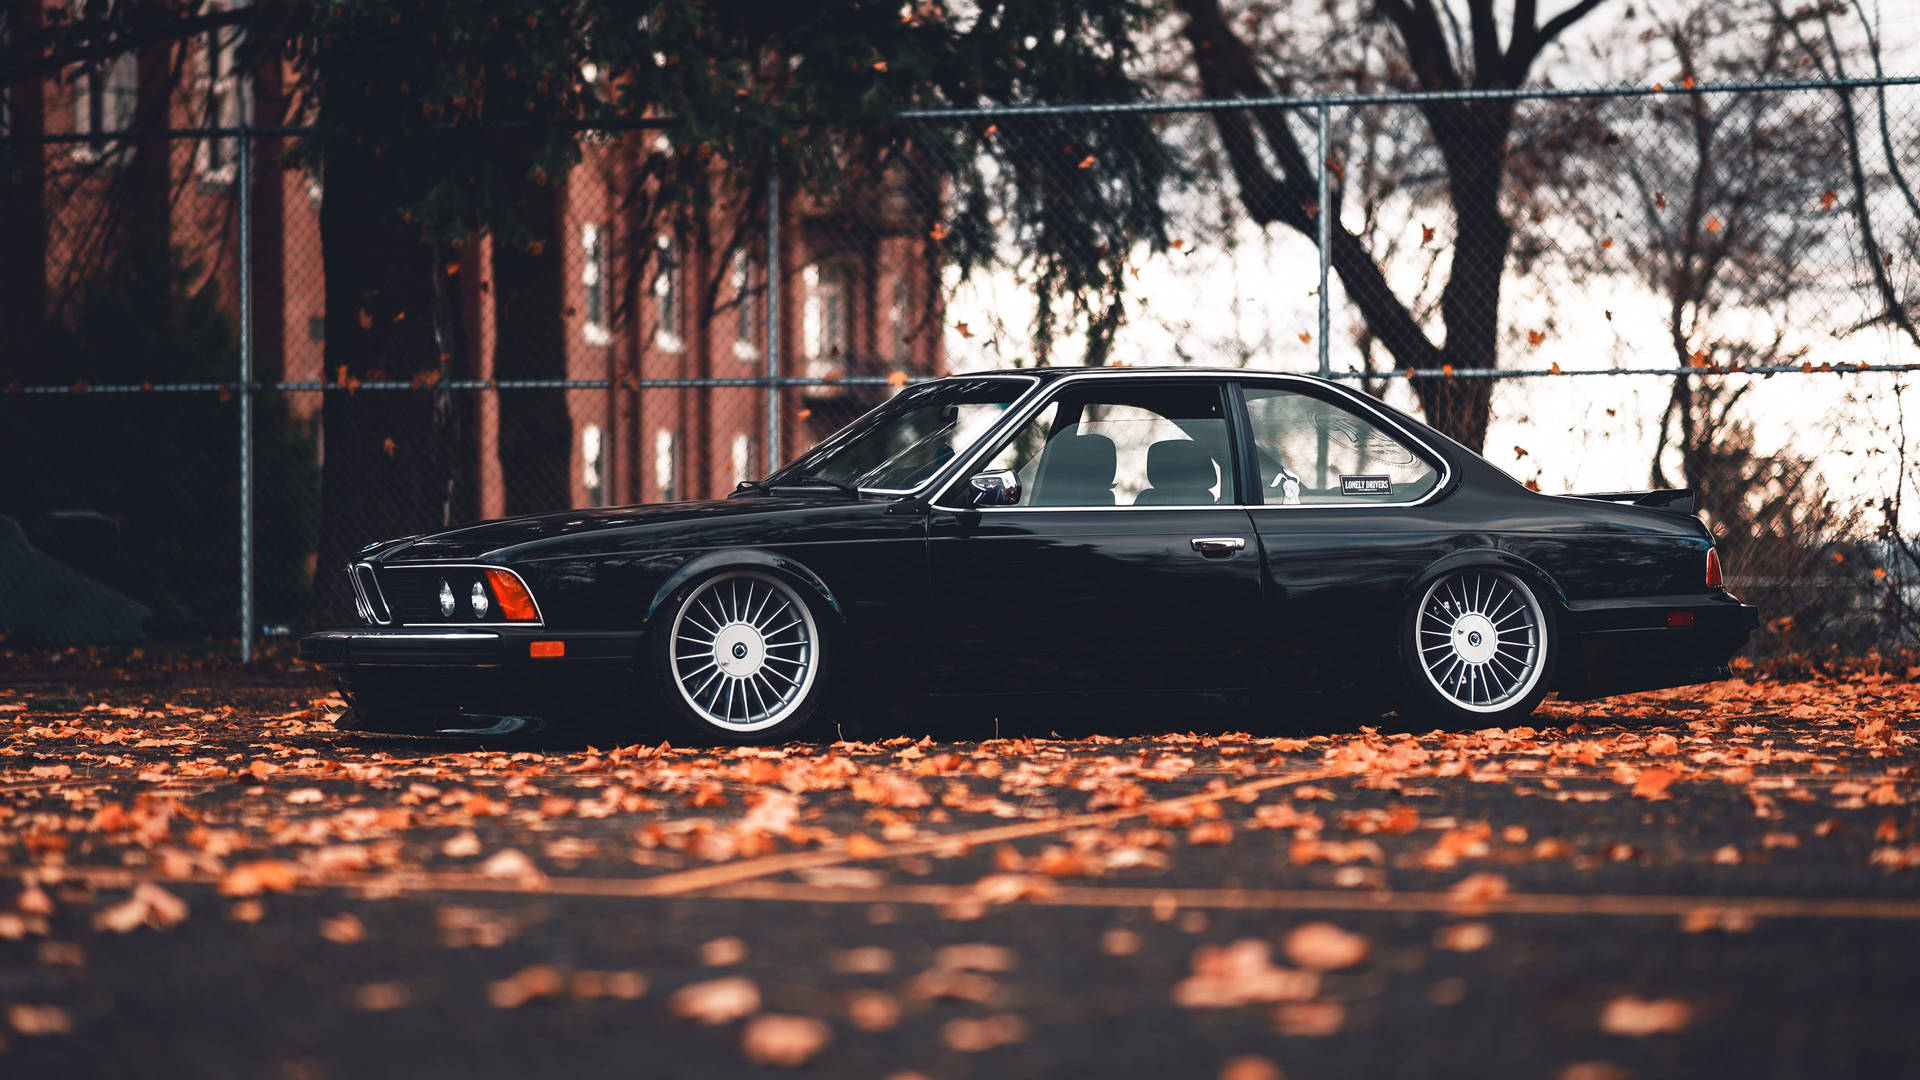 Free Classic Bmw Wallpaper Downloads, [100+] Classic Bmw Wallpapers for  FREE 